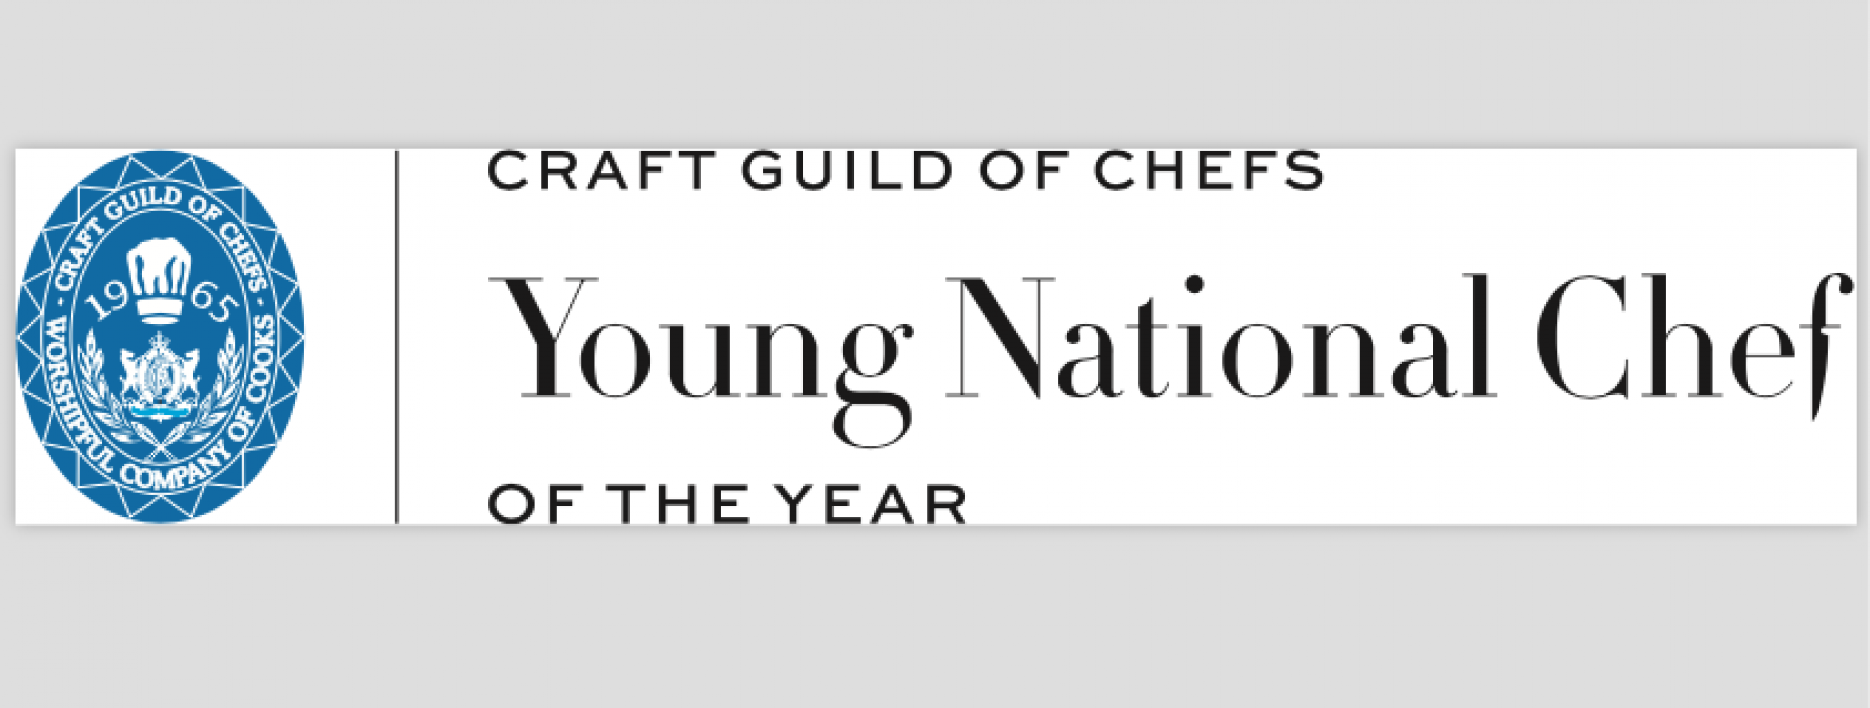 young national chef year 